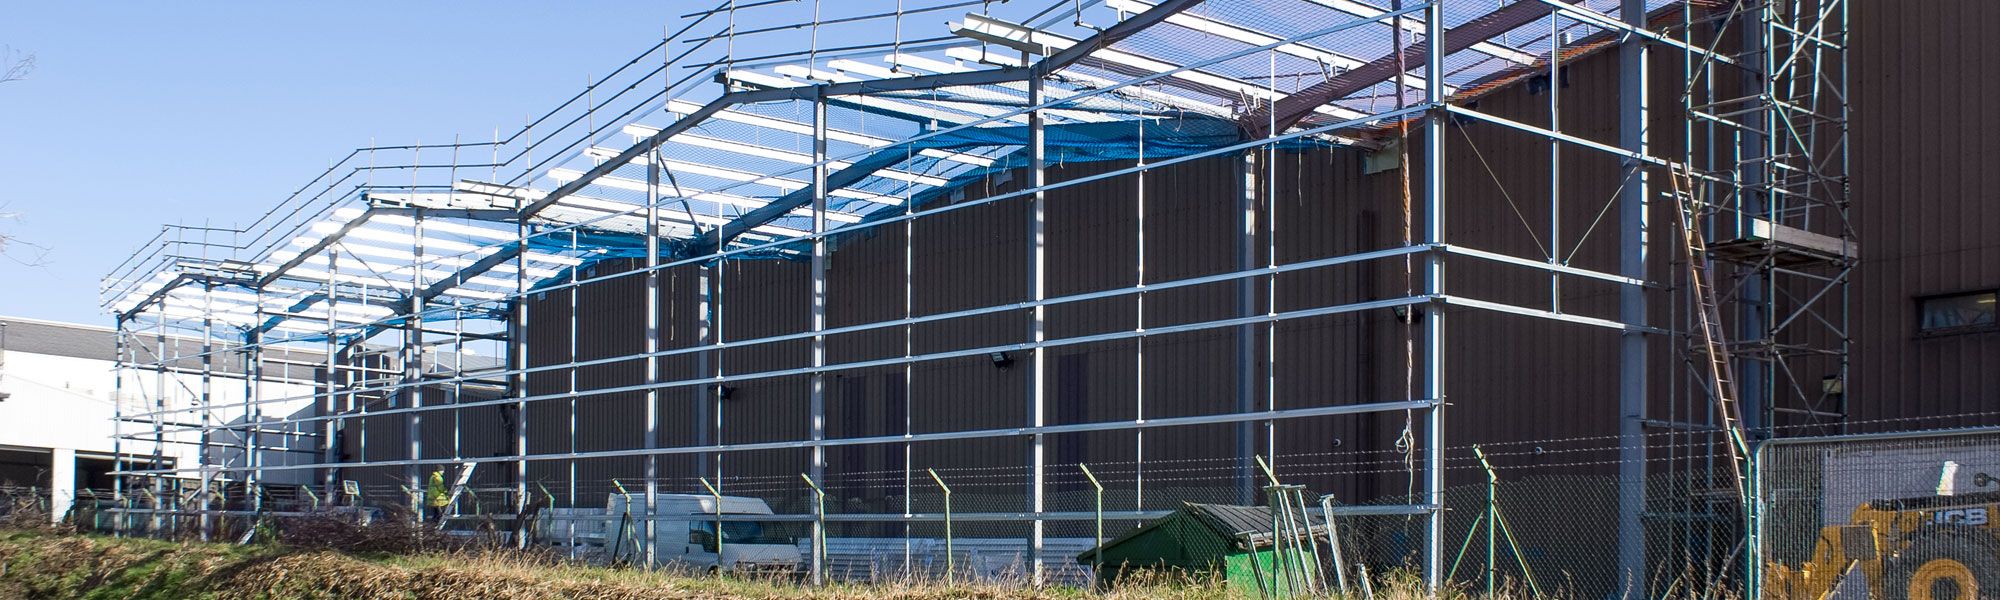 Building being constructed on Wrexham Industrial Estate